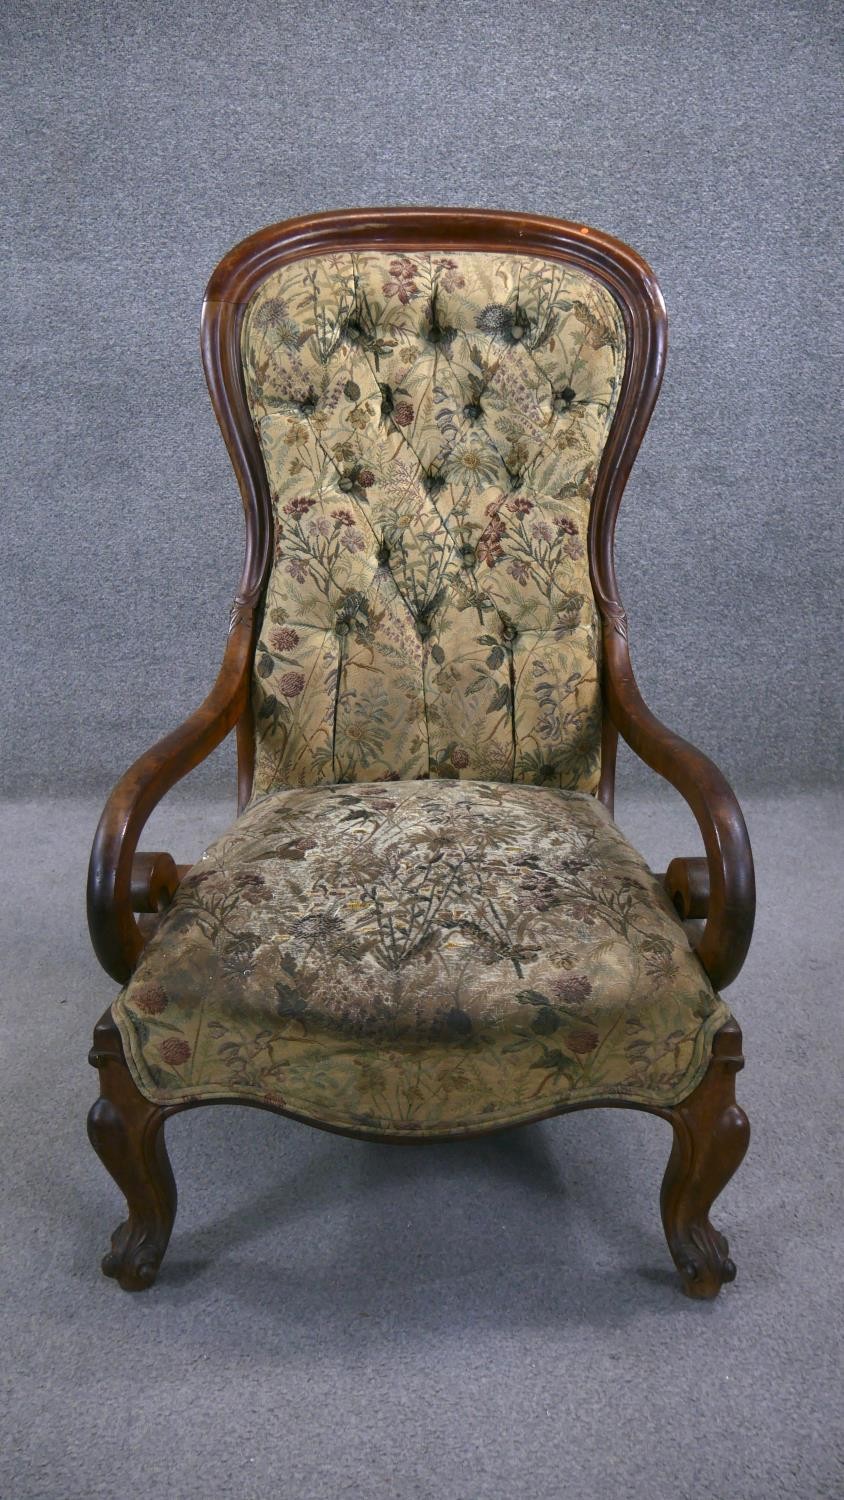 A 19th century mahogany framed spoon back armchair in deep buttoned upholstery on carved cabriole